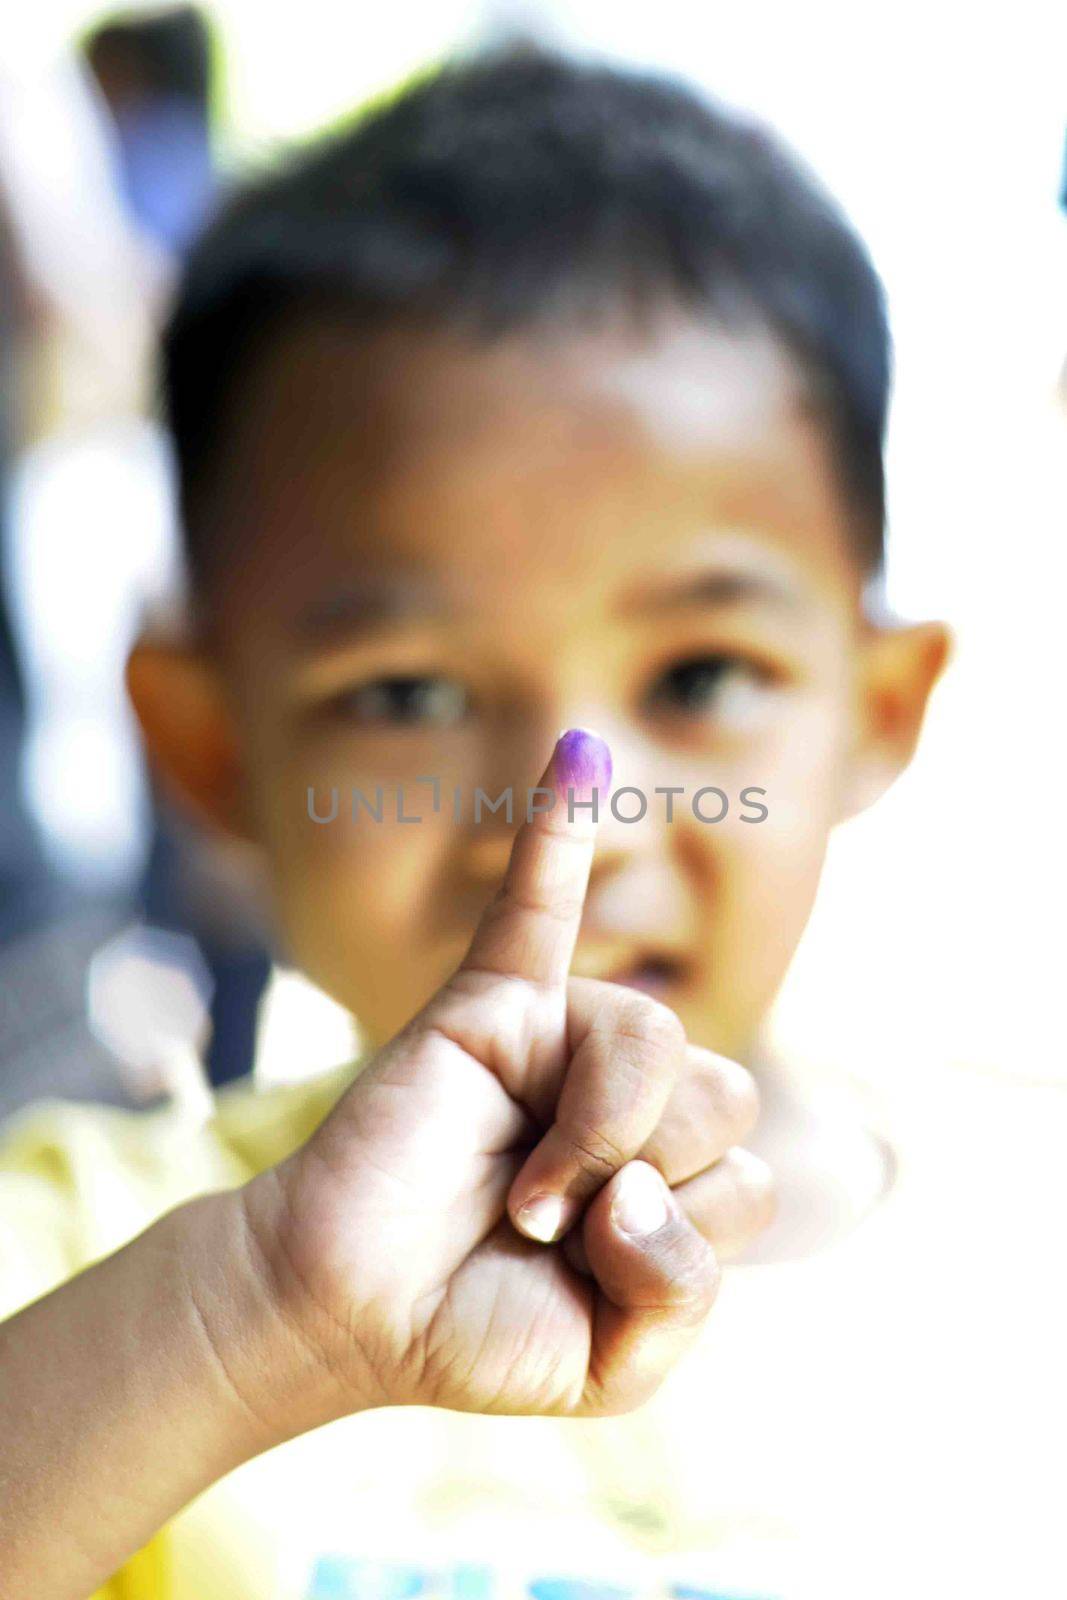 INDONESIA, Jakarta: A child shows off his tainted finger after having received Polio immunization in Ciracas, East Jakarta on March 10, 2016 during  National Polio Immunization Week. Indonesian Health Minister Nila Moeloek announced on March 8, 2016 plans to vaccinate 23.7 million babies — from birth to 59 months of age — to keep the world on track toward being polio-free by 2020.